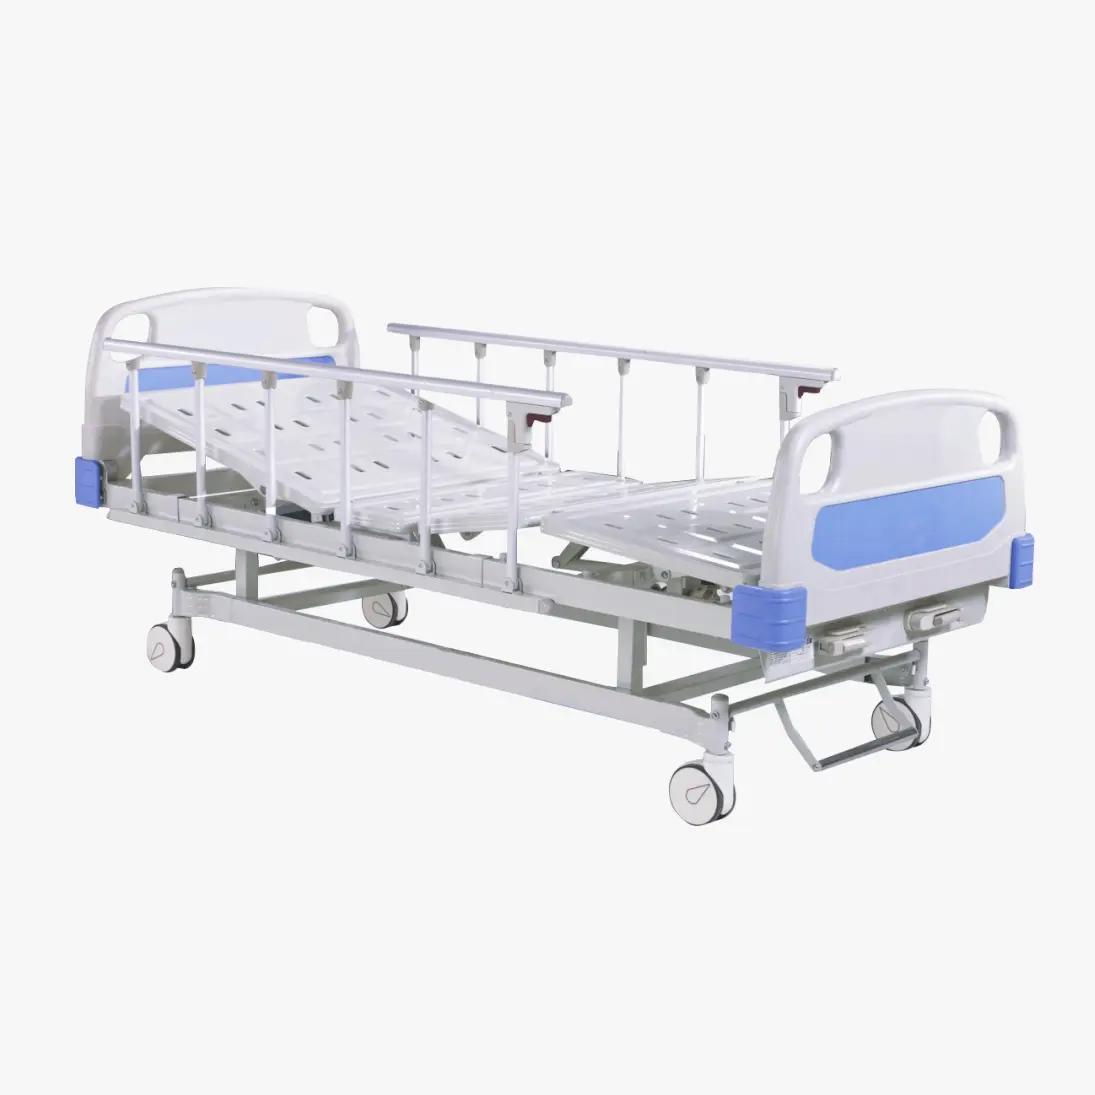 How Do Hospital Beds Contribute to Patient Care?